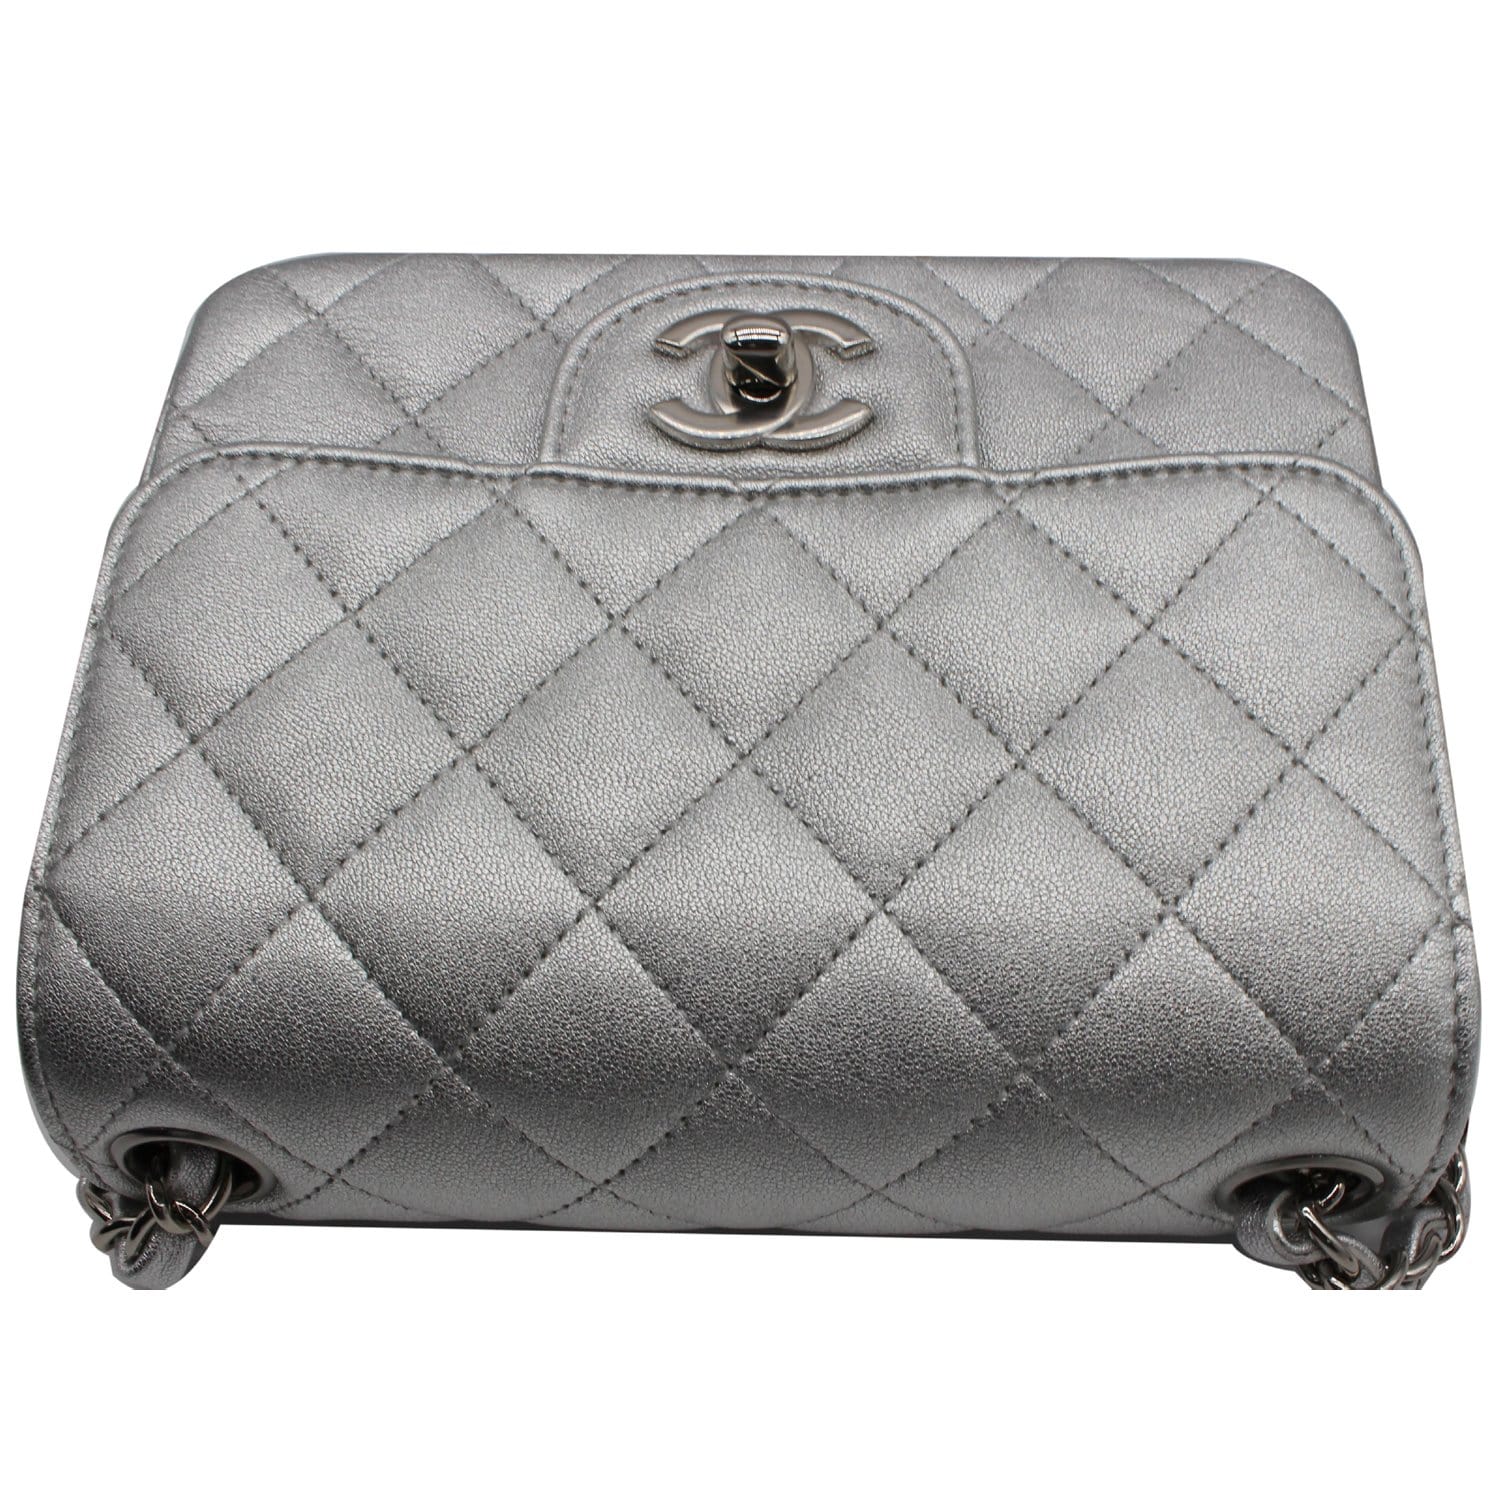 Limited Edition Small Classic Flap Bag in Metallic Silver Colour